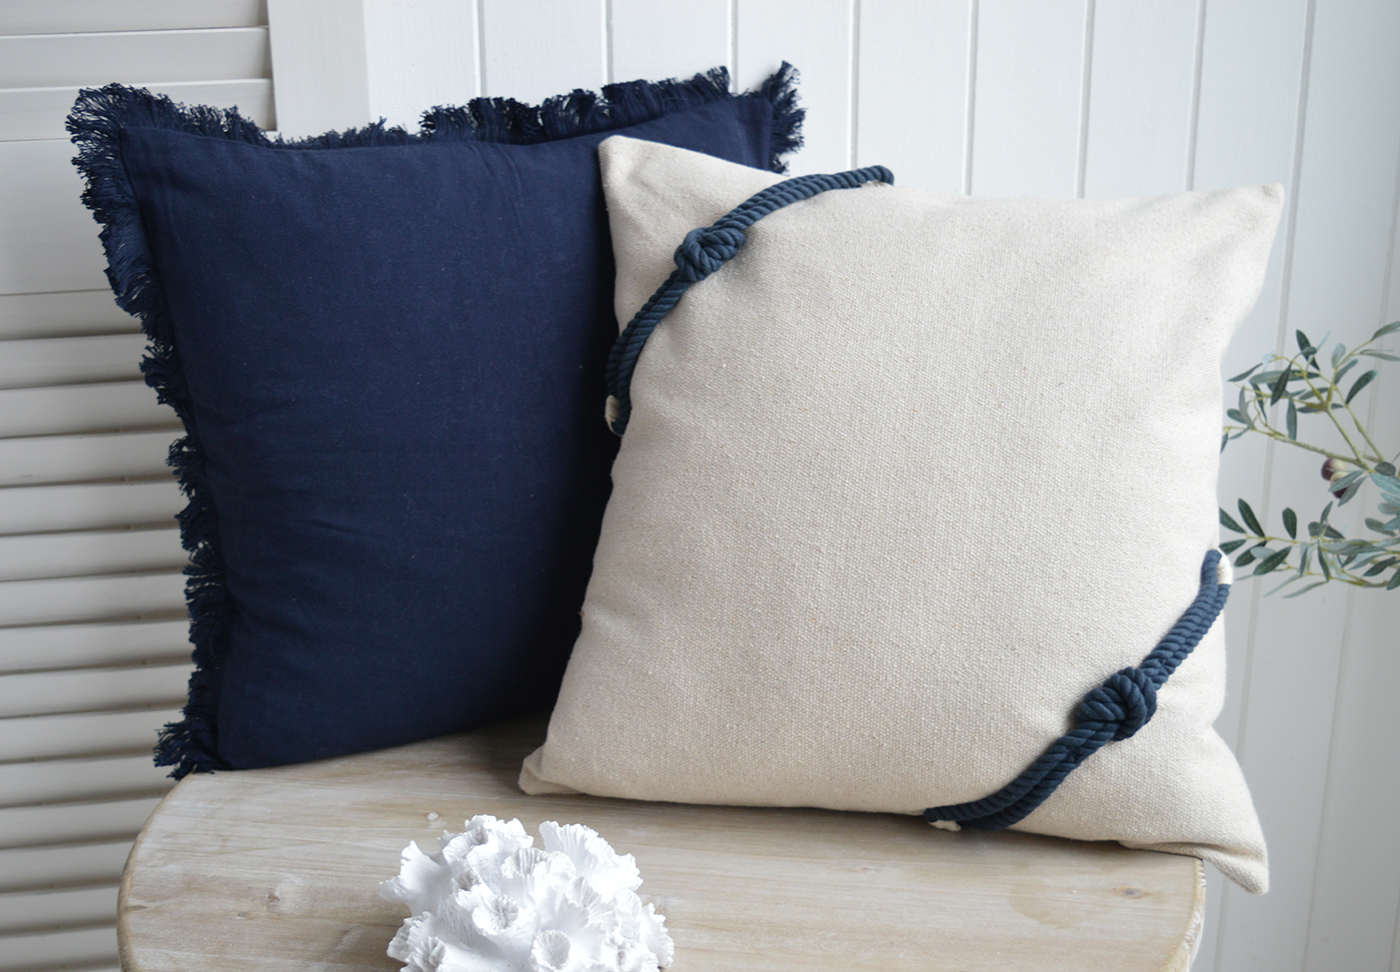 New England and Hamptons style coastal cushions in navy and rope